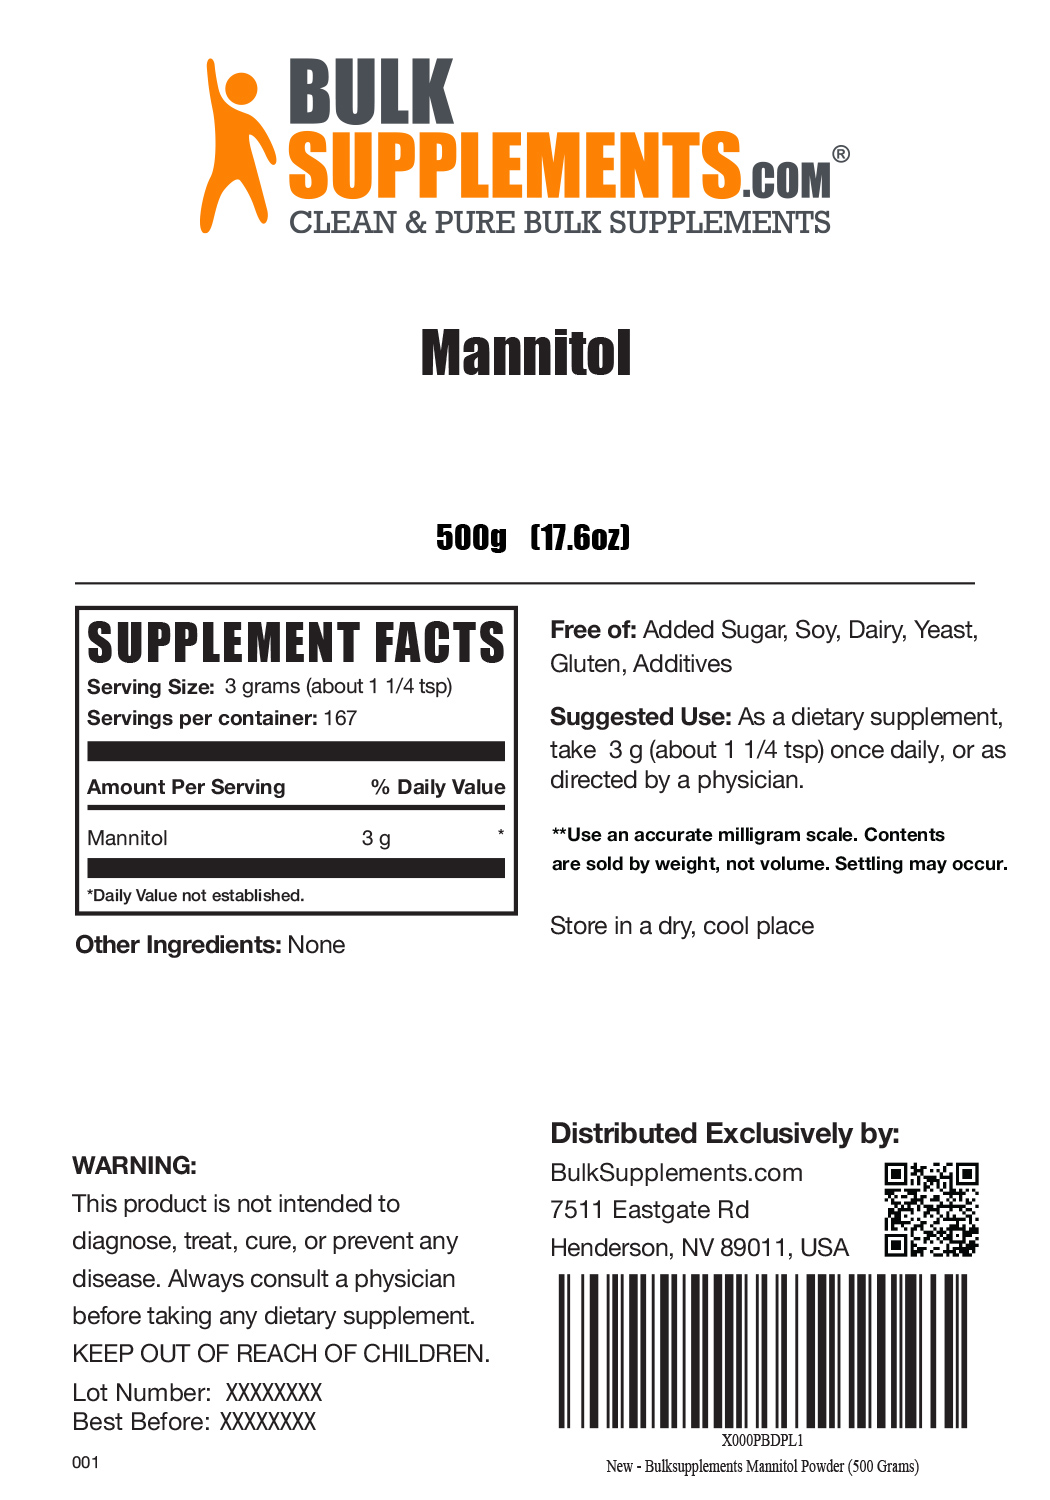 BulkSupplements.com Mannitol Powder - Mannitol Sweetener - Mannitol Powder Ultra Pure - Mannitol Sugar (500 Grams - 1.1 lbs) - image 2 of 5